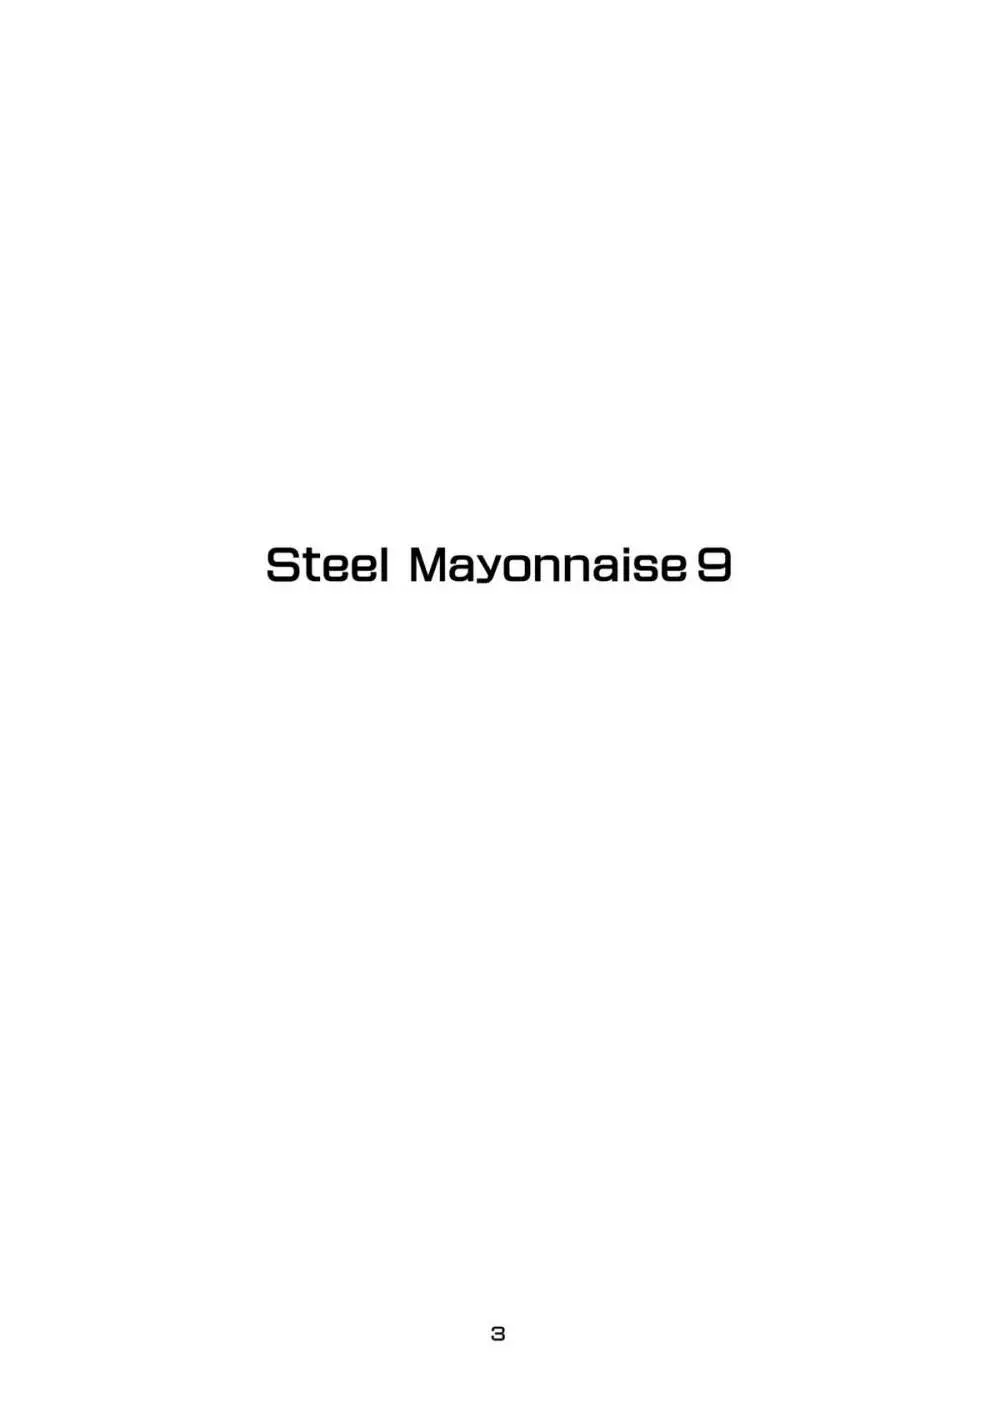 Steel Mayonnaise 9 - page2